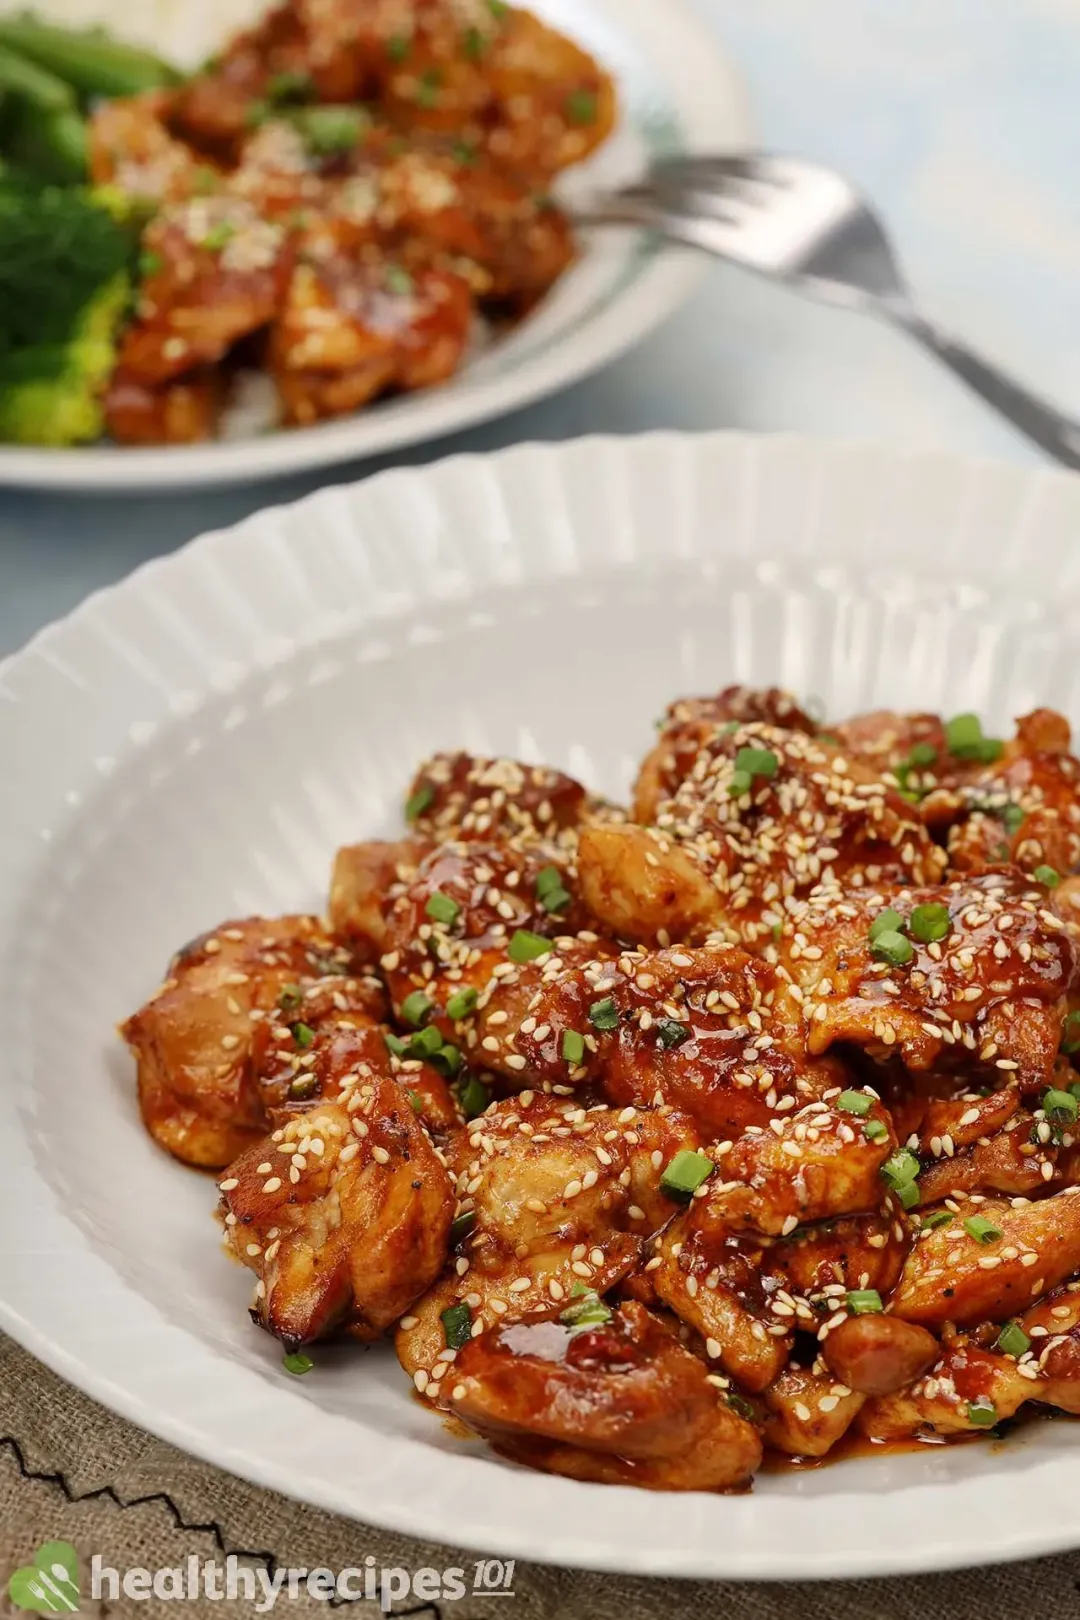 Tips for Making Sesame Chicken in an Air Fryer